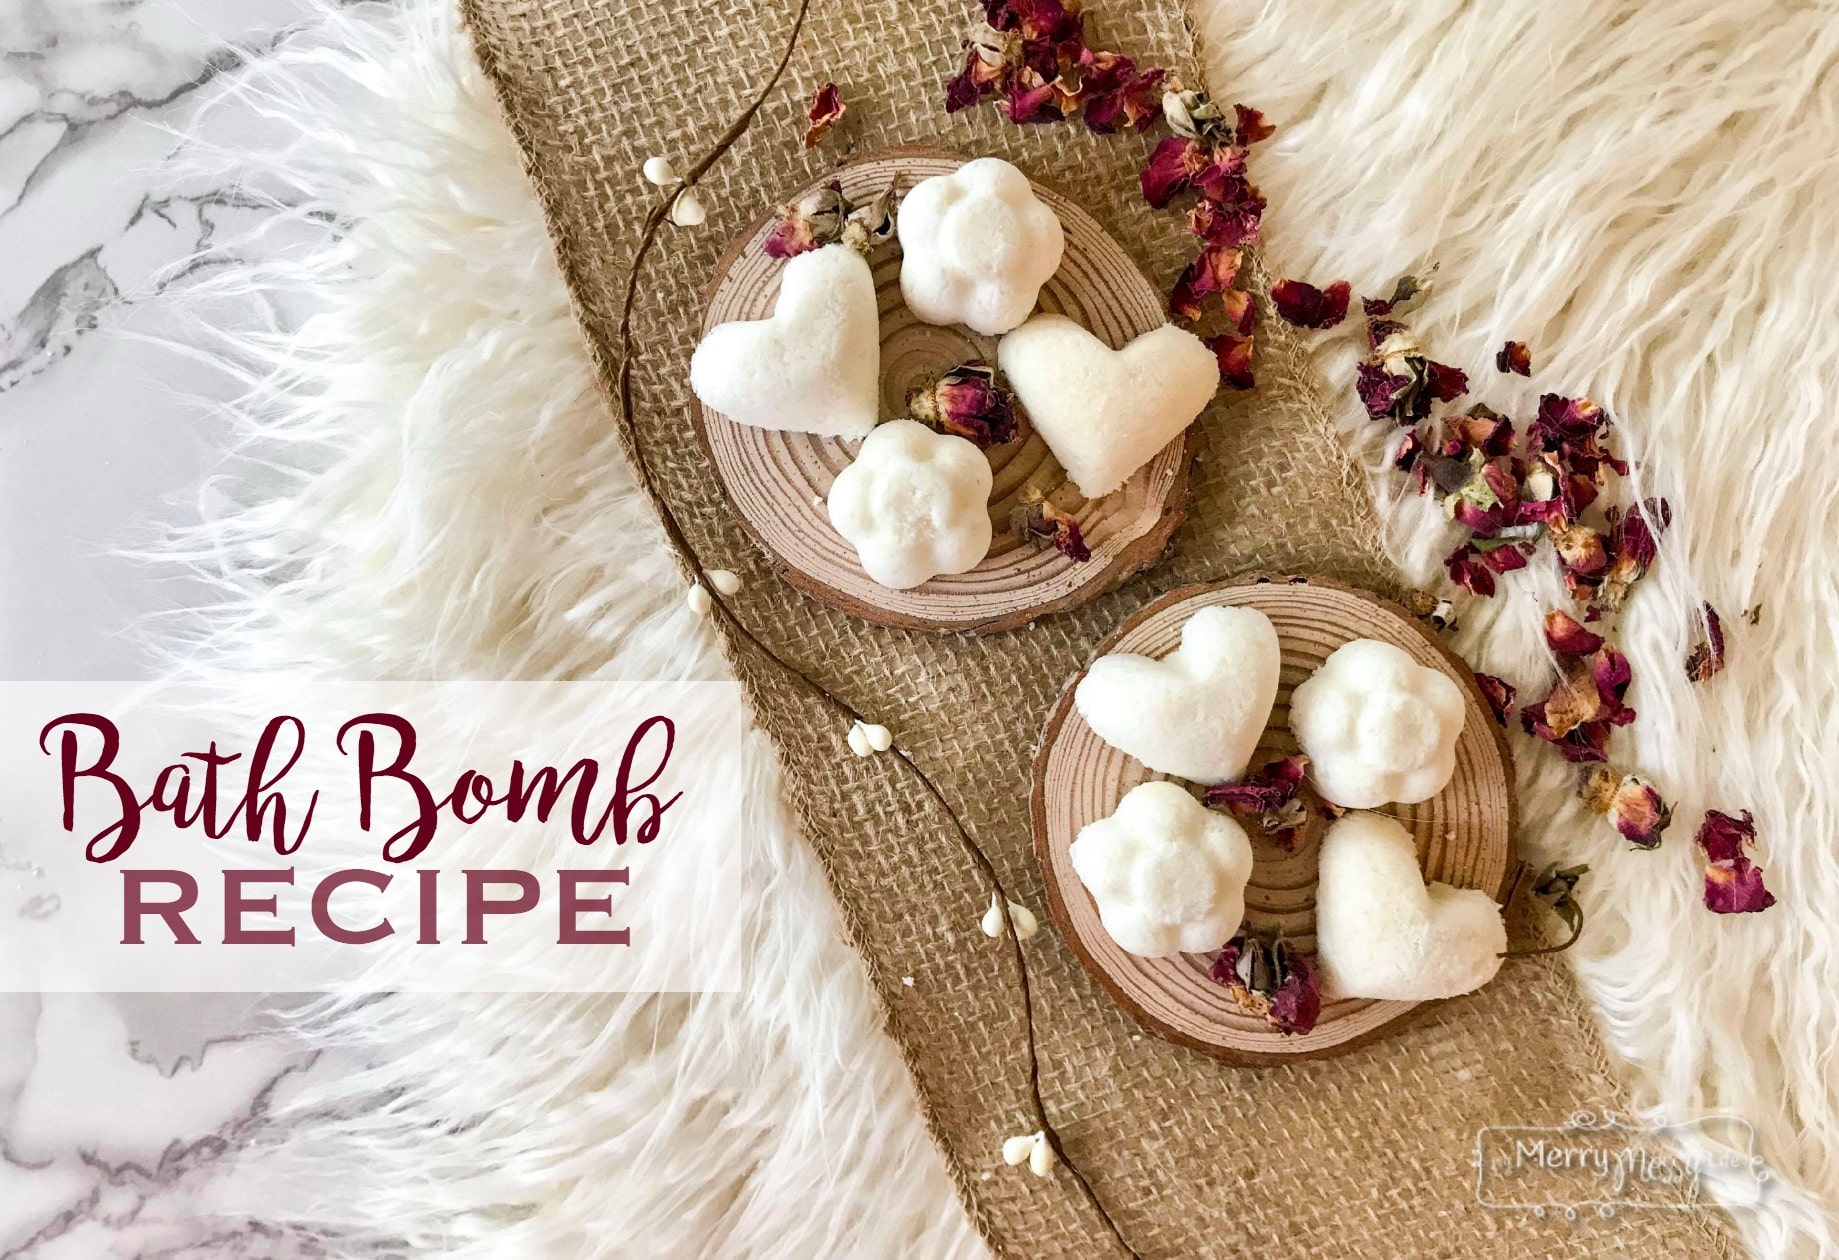 Fizzy Natural Bath Bombs Recipe and Tutorial - makes for great gifts!